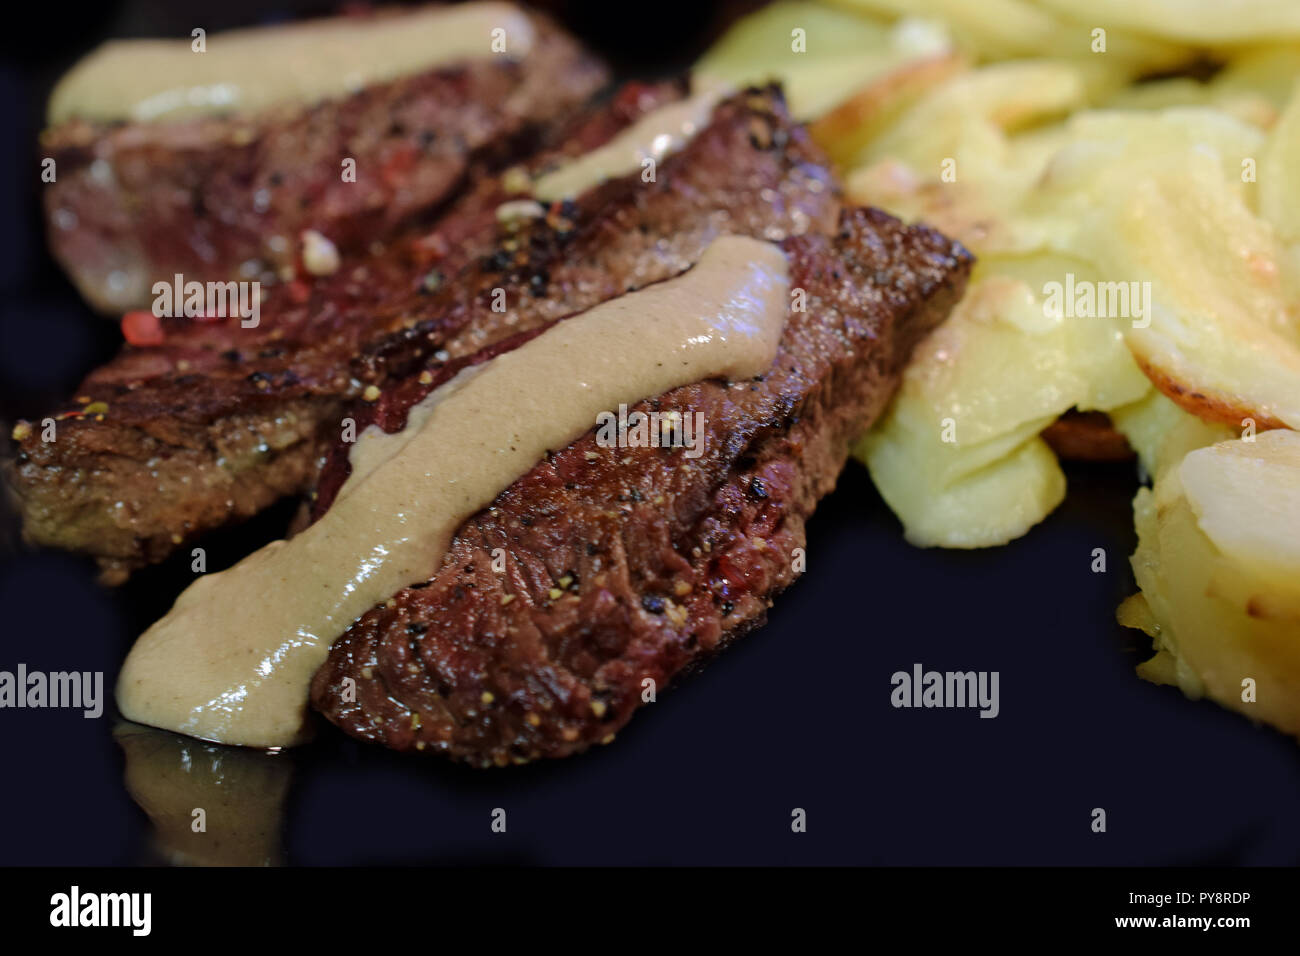 Spiced fillet beefsteak with creamy peppercorn sauce and gratin potatoes. Stock Photo